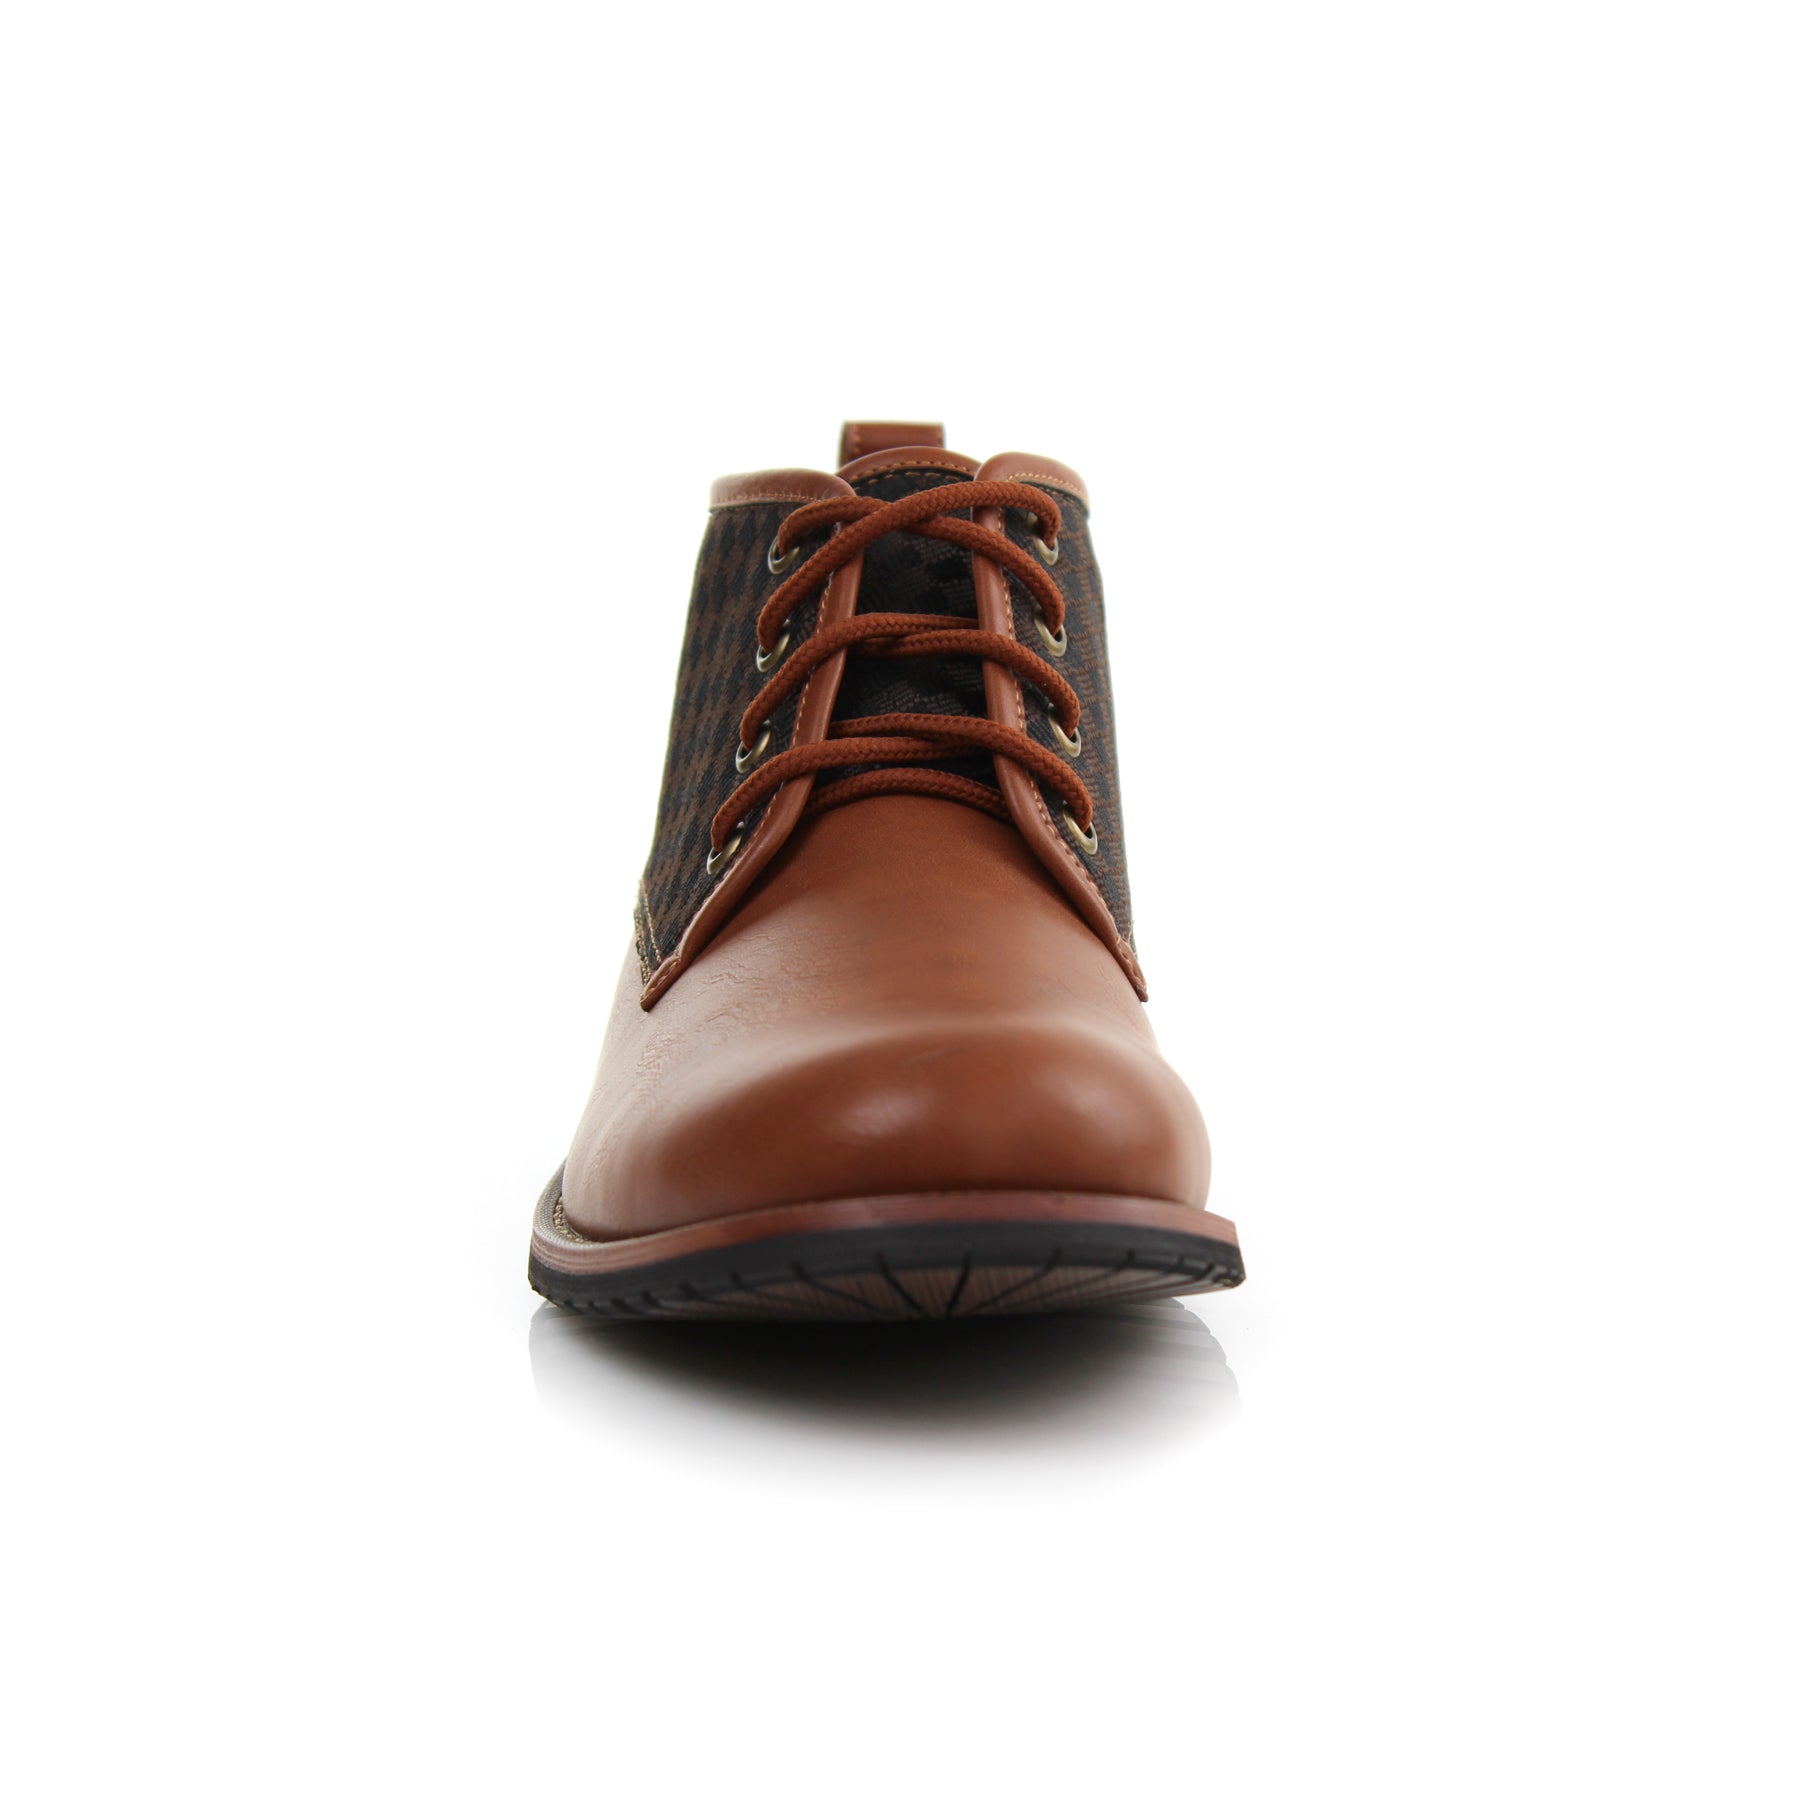 Plaid Contrast Chukka Boots | Ryan by Ferro Aldo | Conal Footwear | Front Angle View